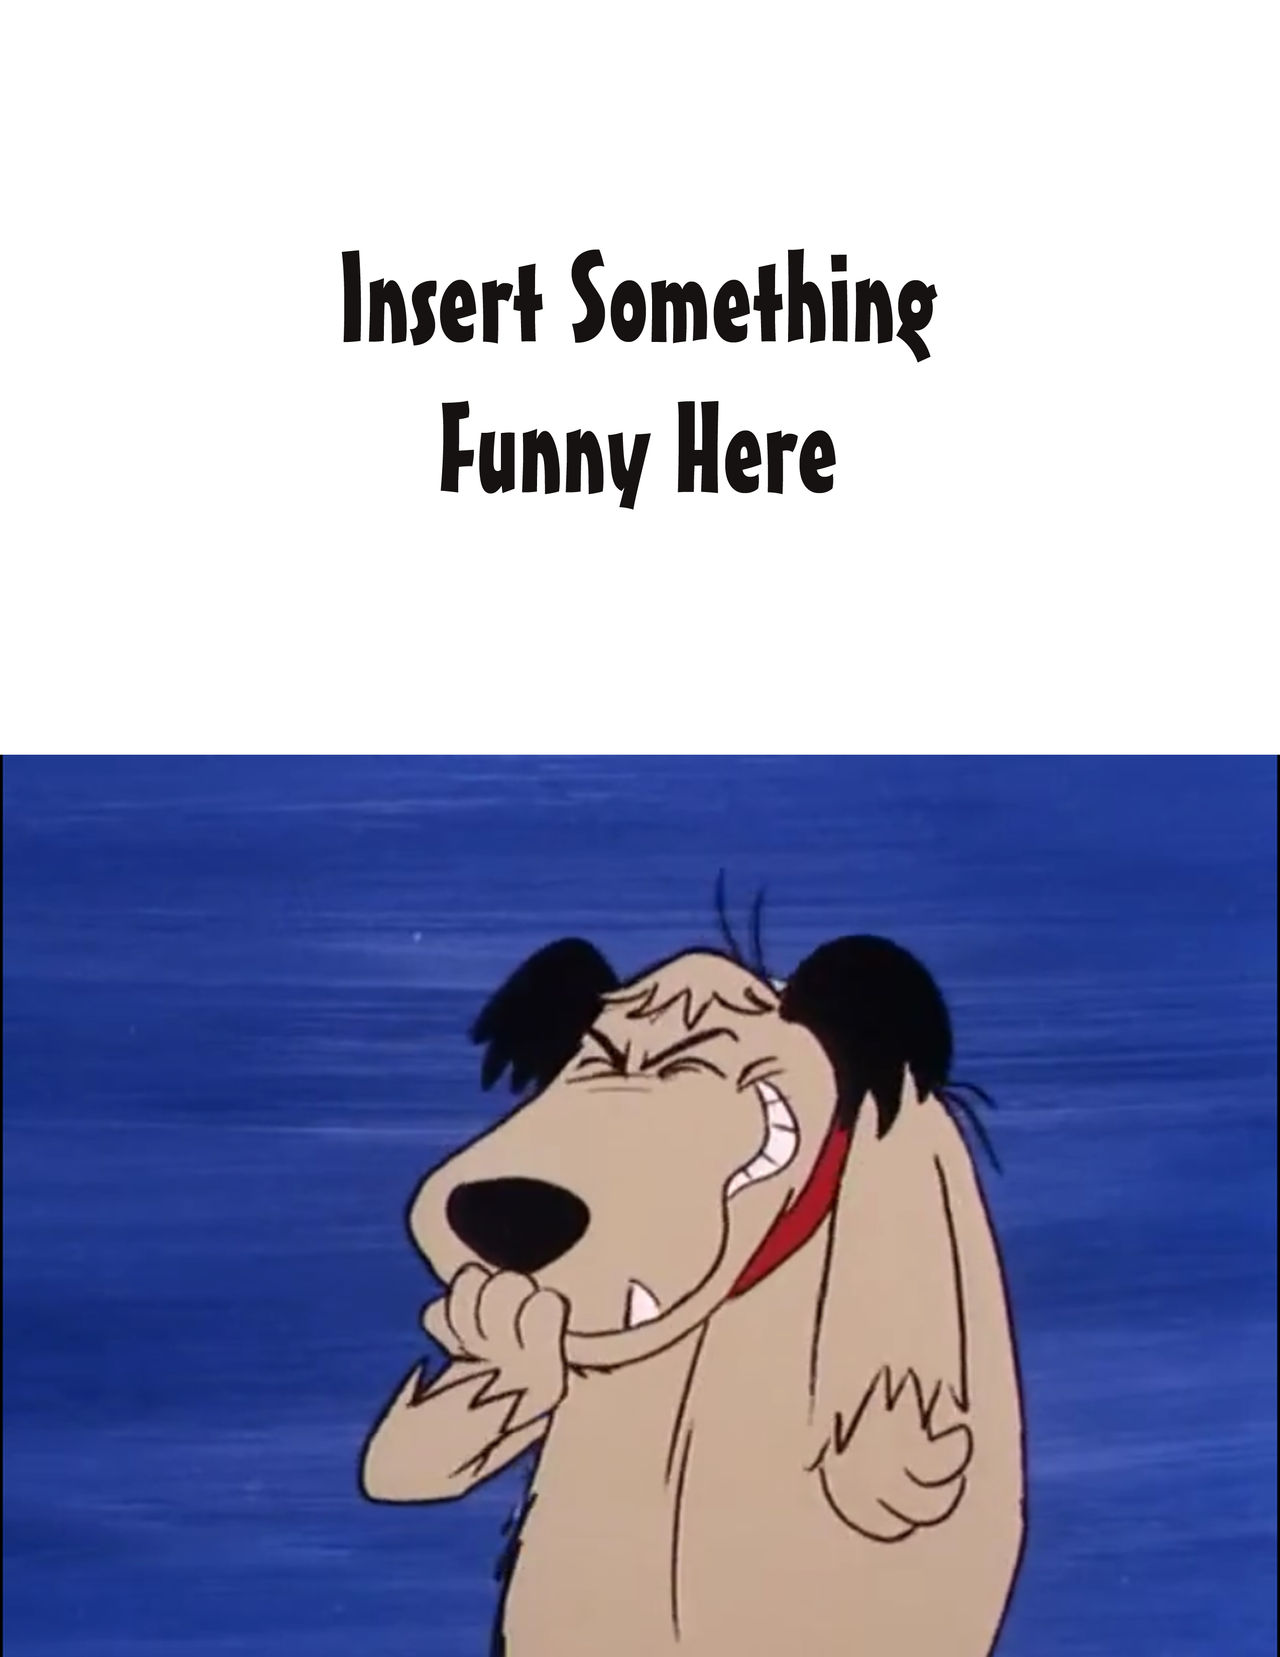 Muttley laughs at... meme by PeruAlonso on DeviantArt